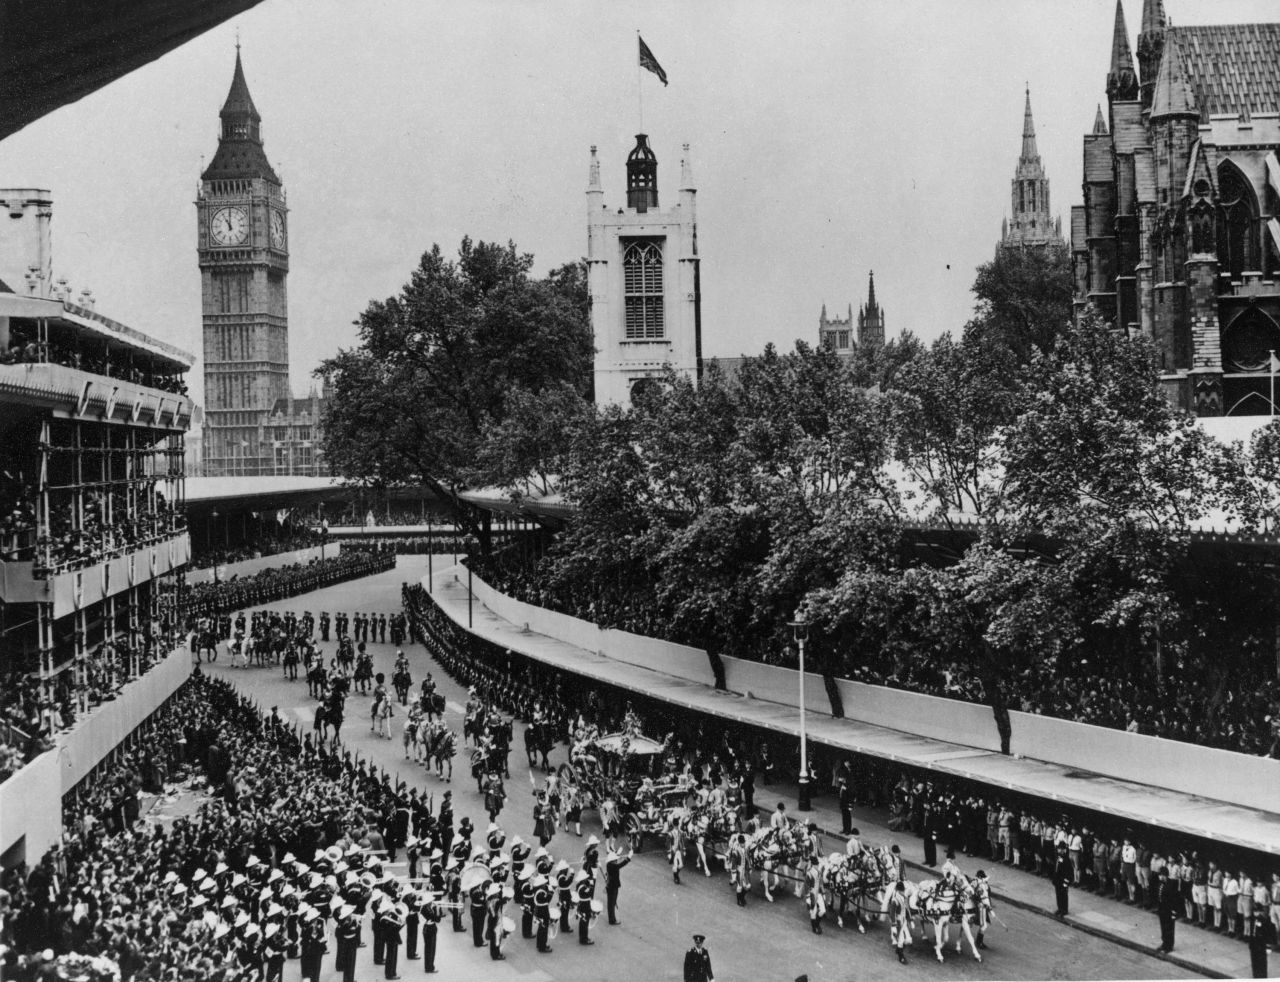 Crowds watch as the procession passes through Parliament Square in London.